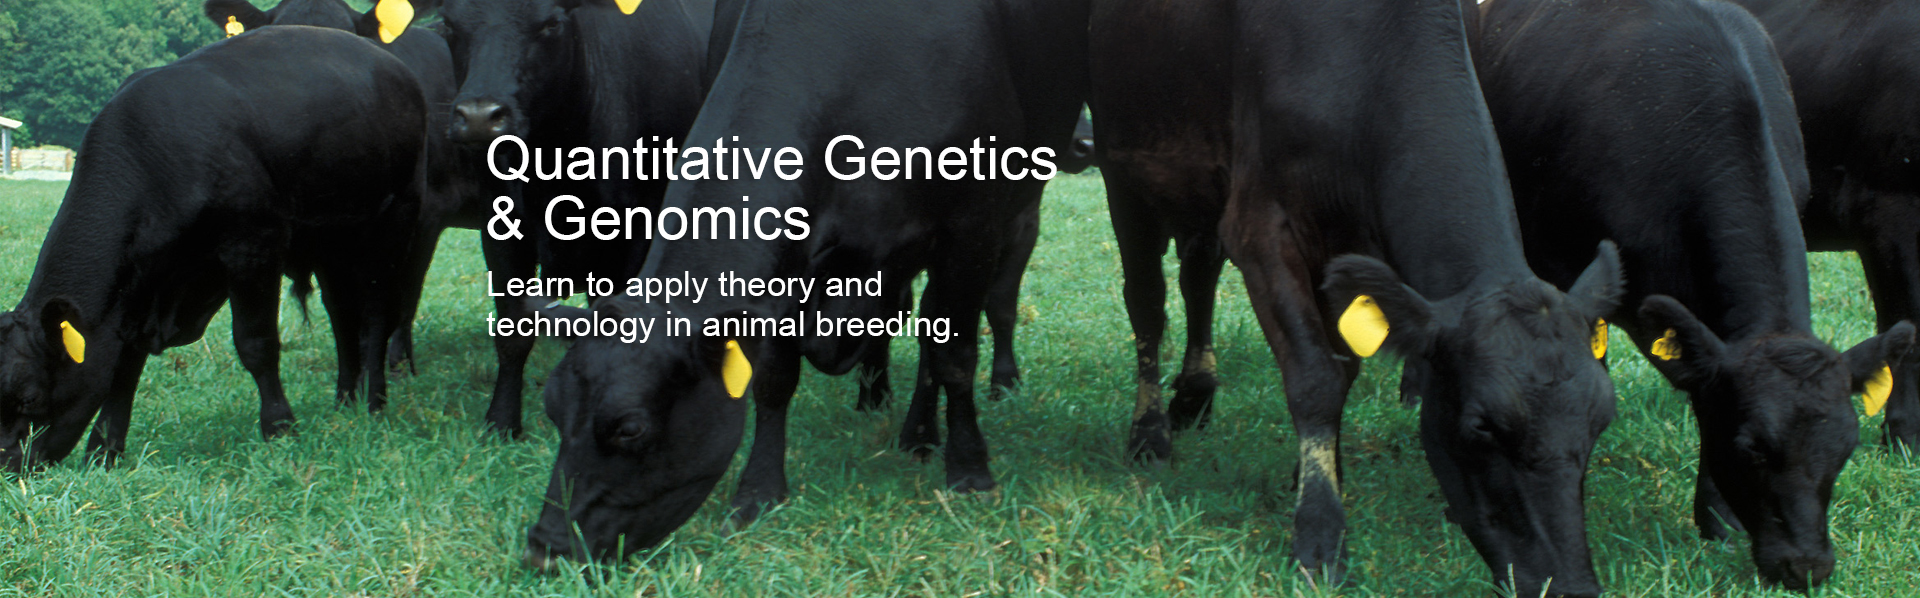 Black cows with yellow ear tags eat grass in a field. Learn to apply theory and technology in animal breeding to solve real-world programs with these online graduate level courses in quantitative genetics and genomics.